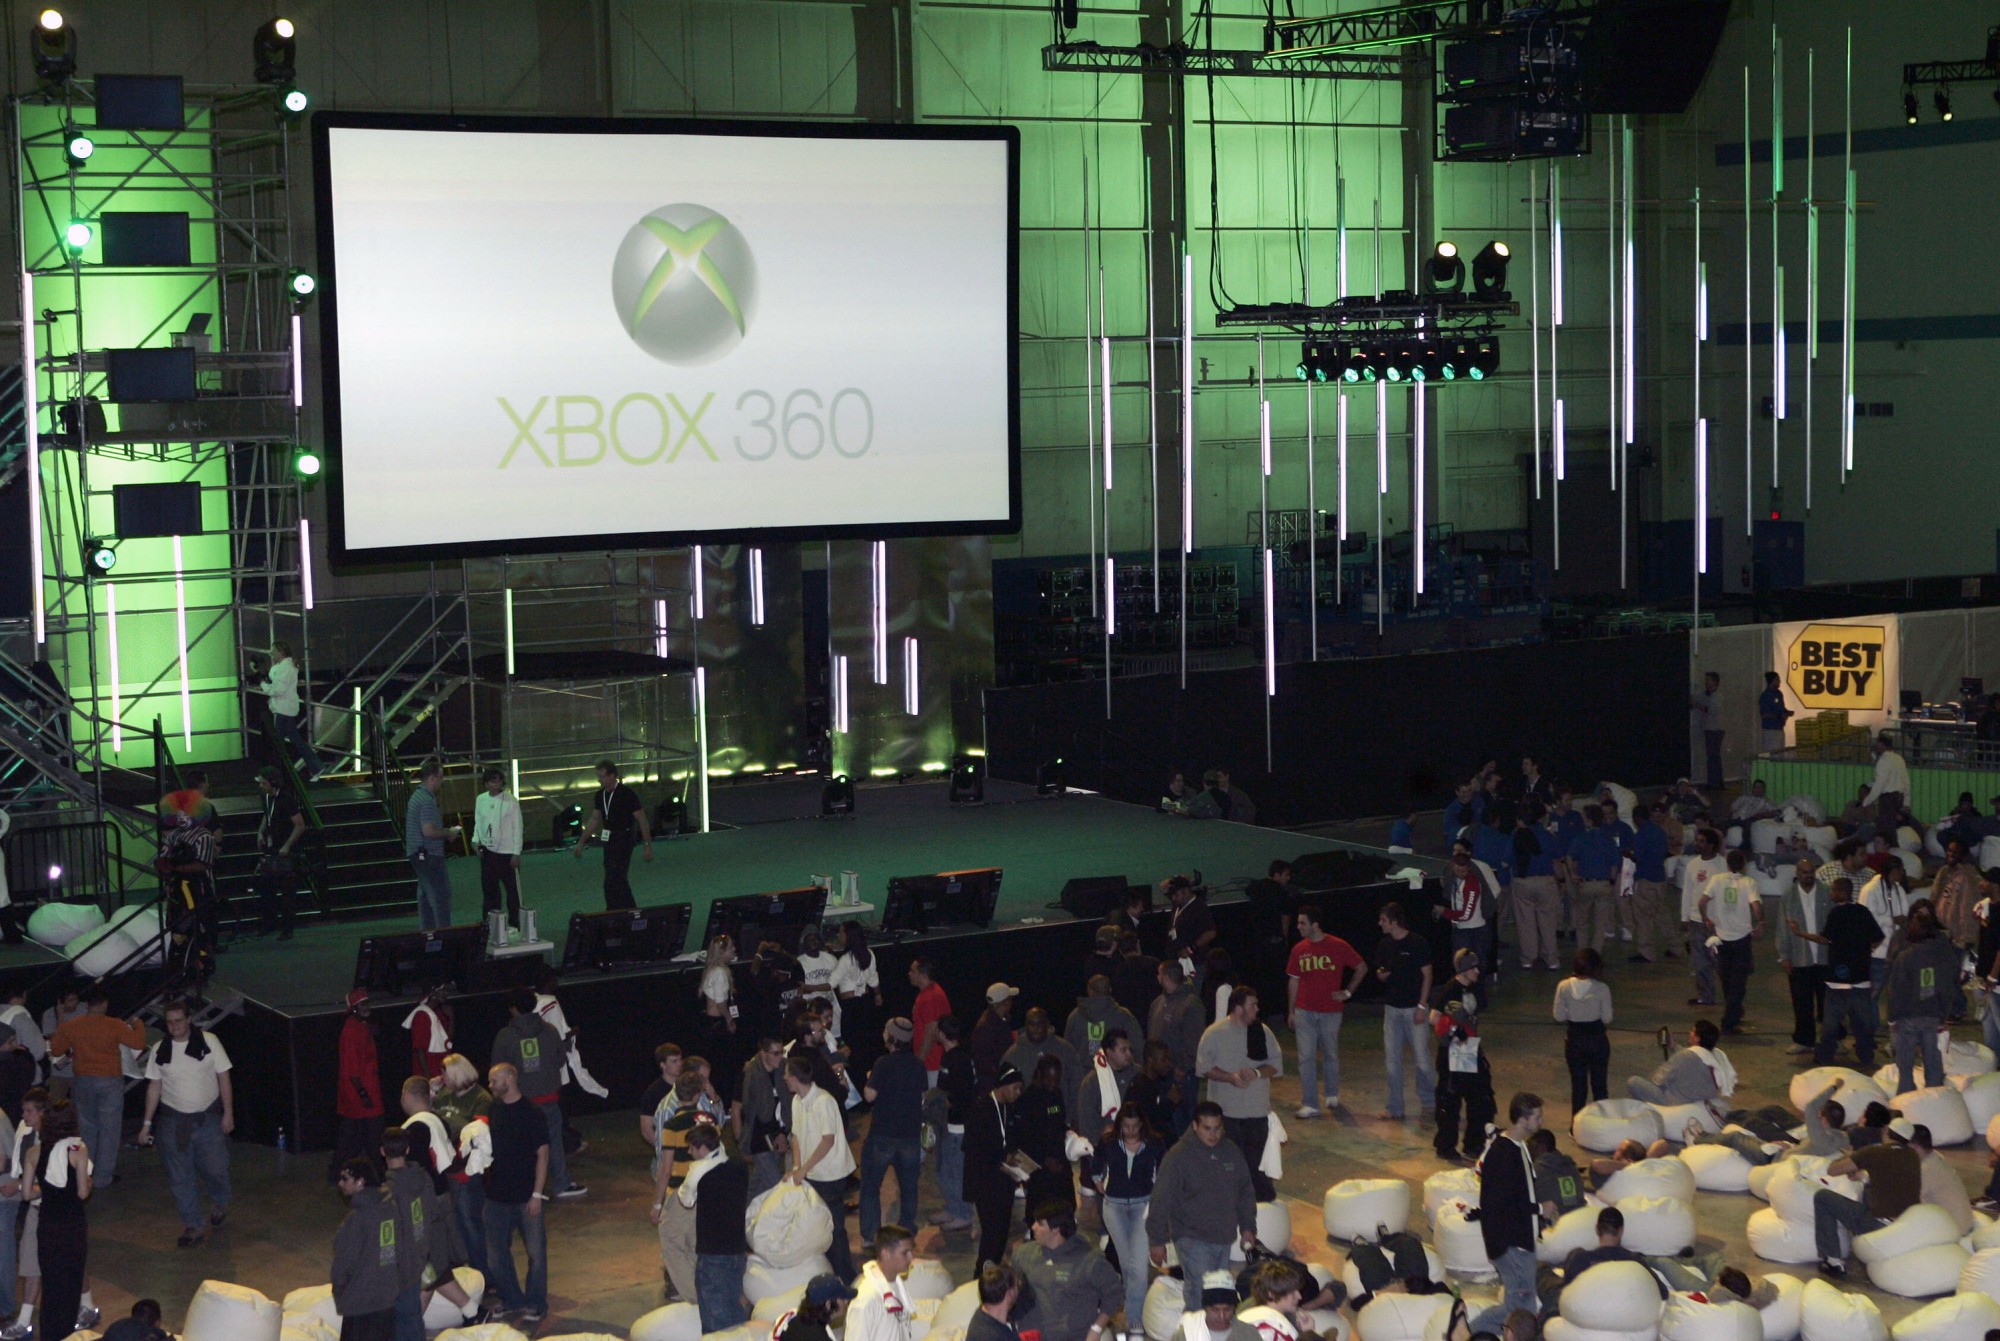 Microsoft is not closing the Xbox 360 Marketplace, acceptance is still open